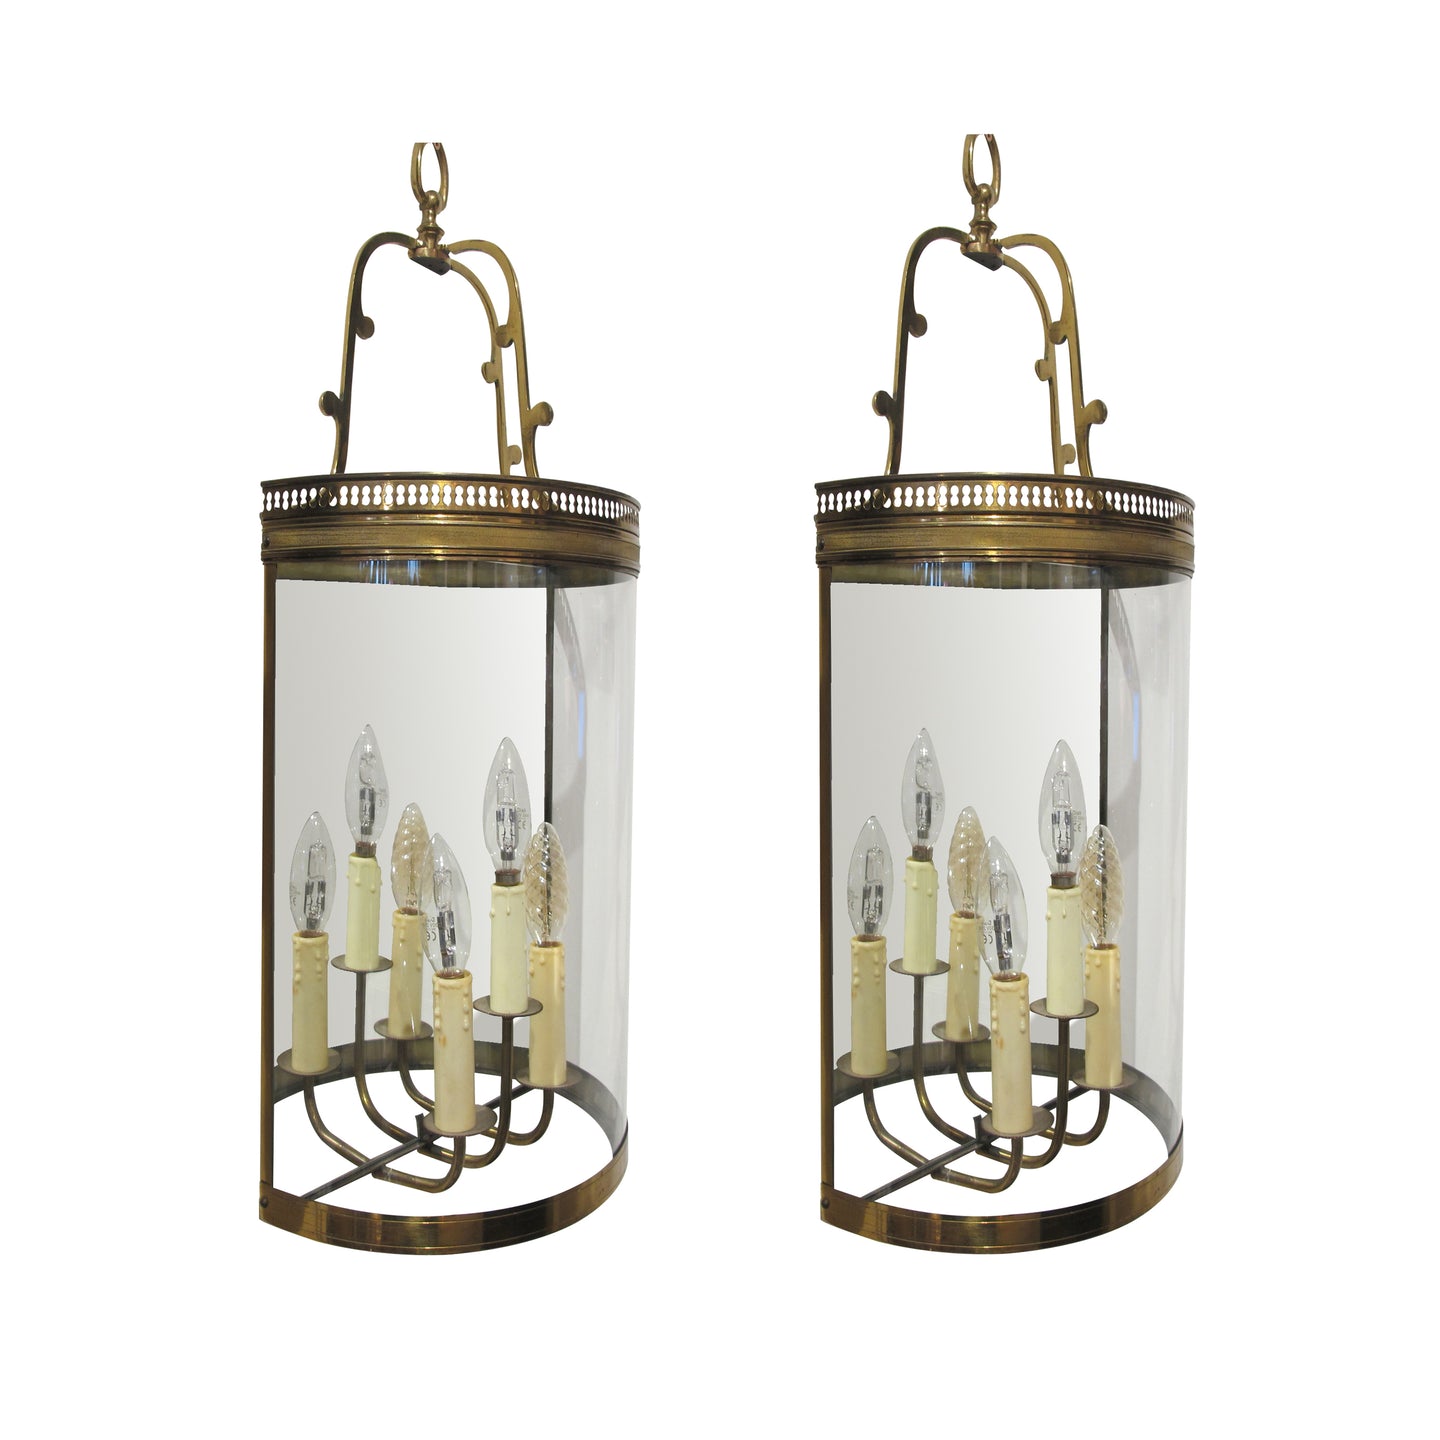 1950's Pair of brass and curved glass lanterns, French